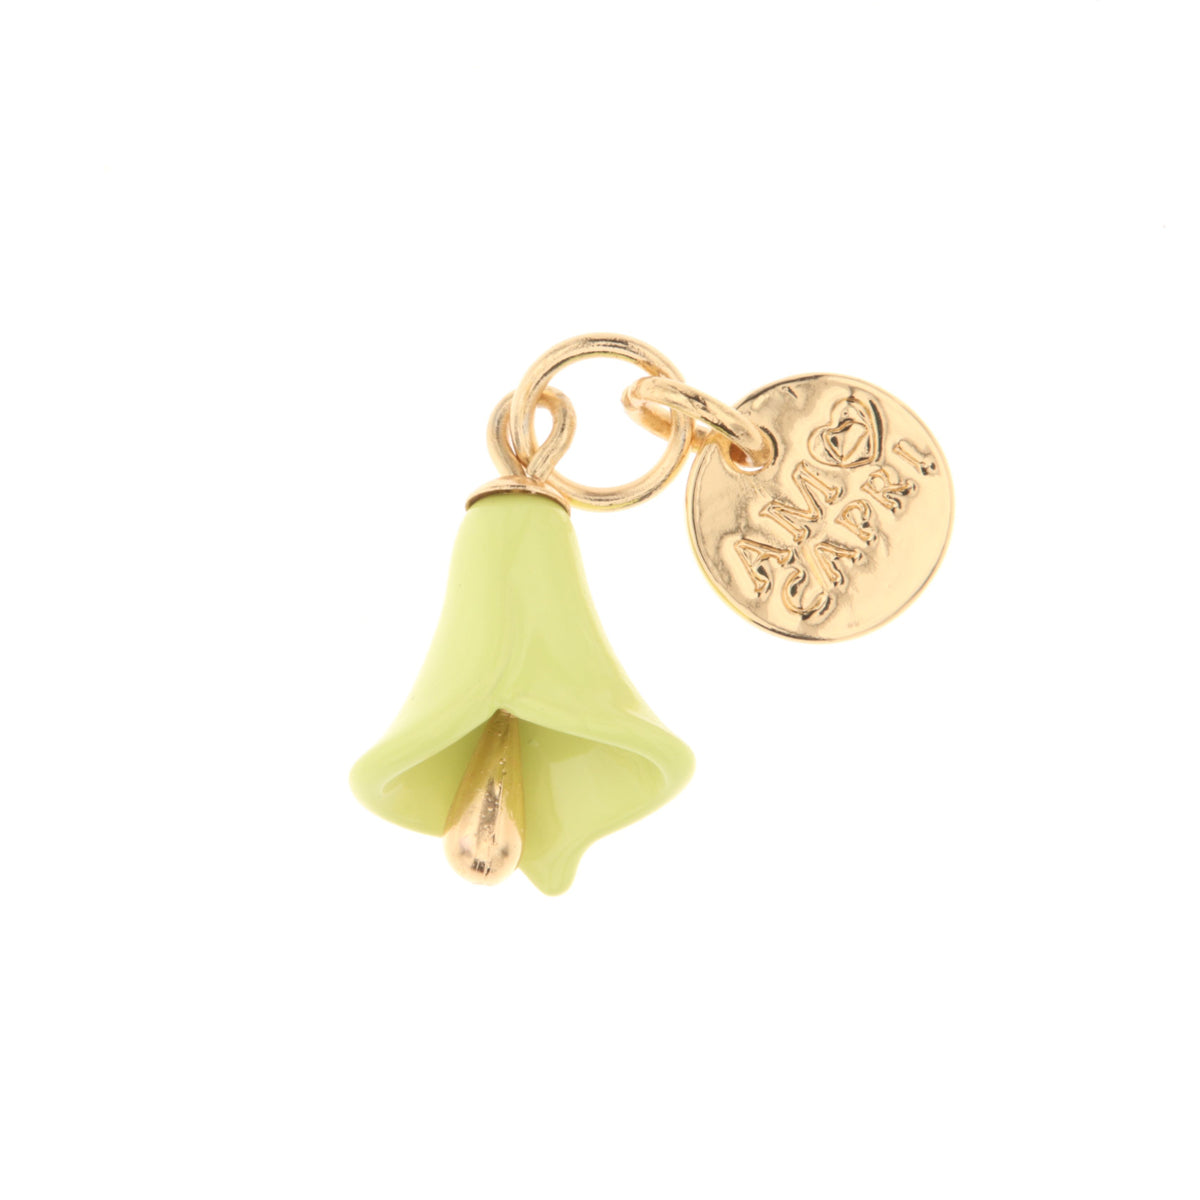 Metal pendant bell in the shape of a calla embellished with colored glazes